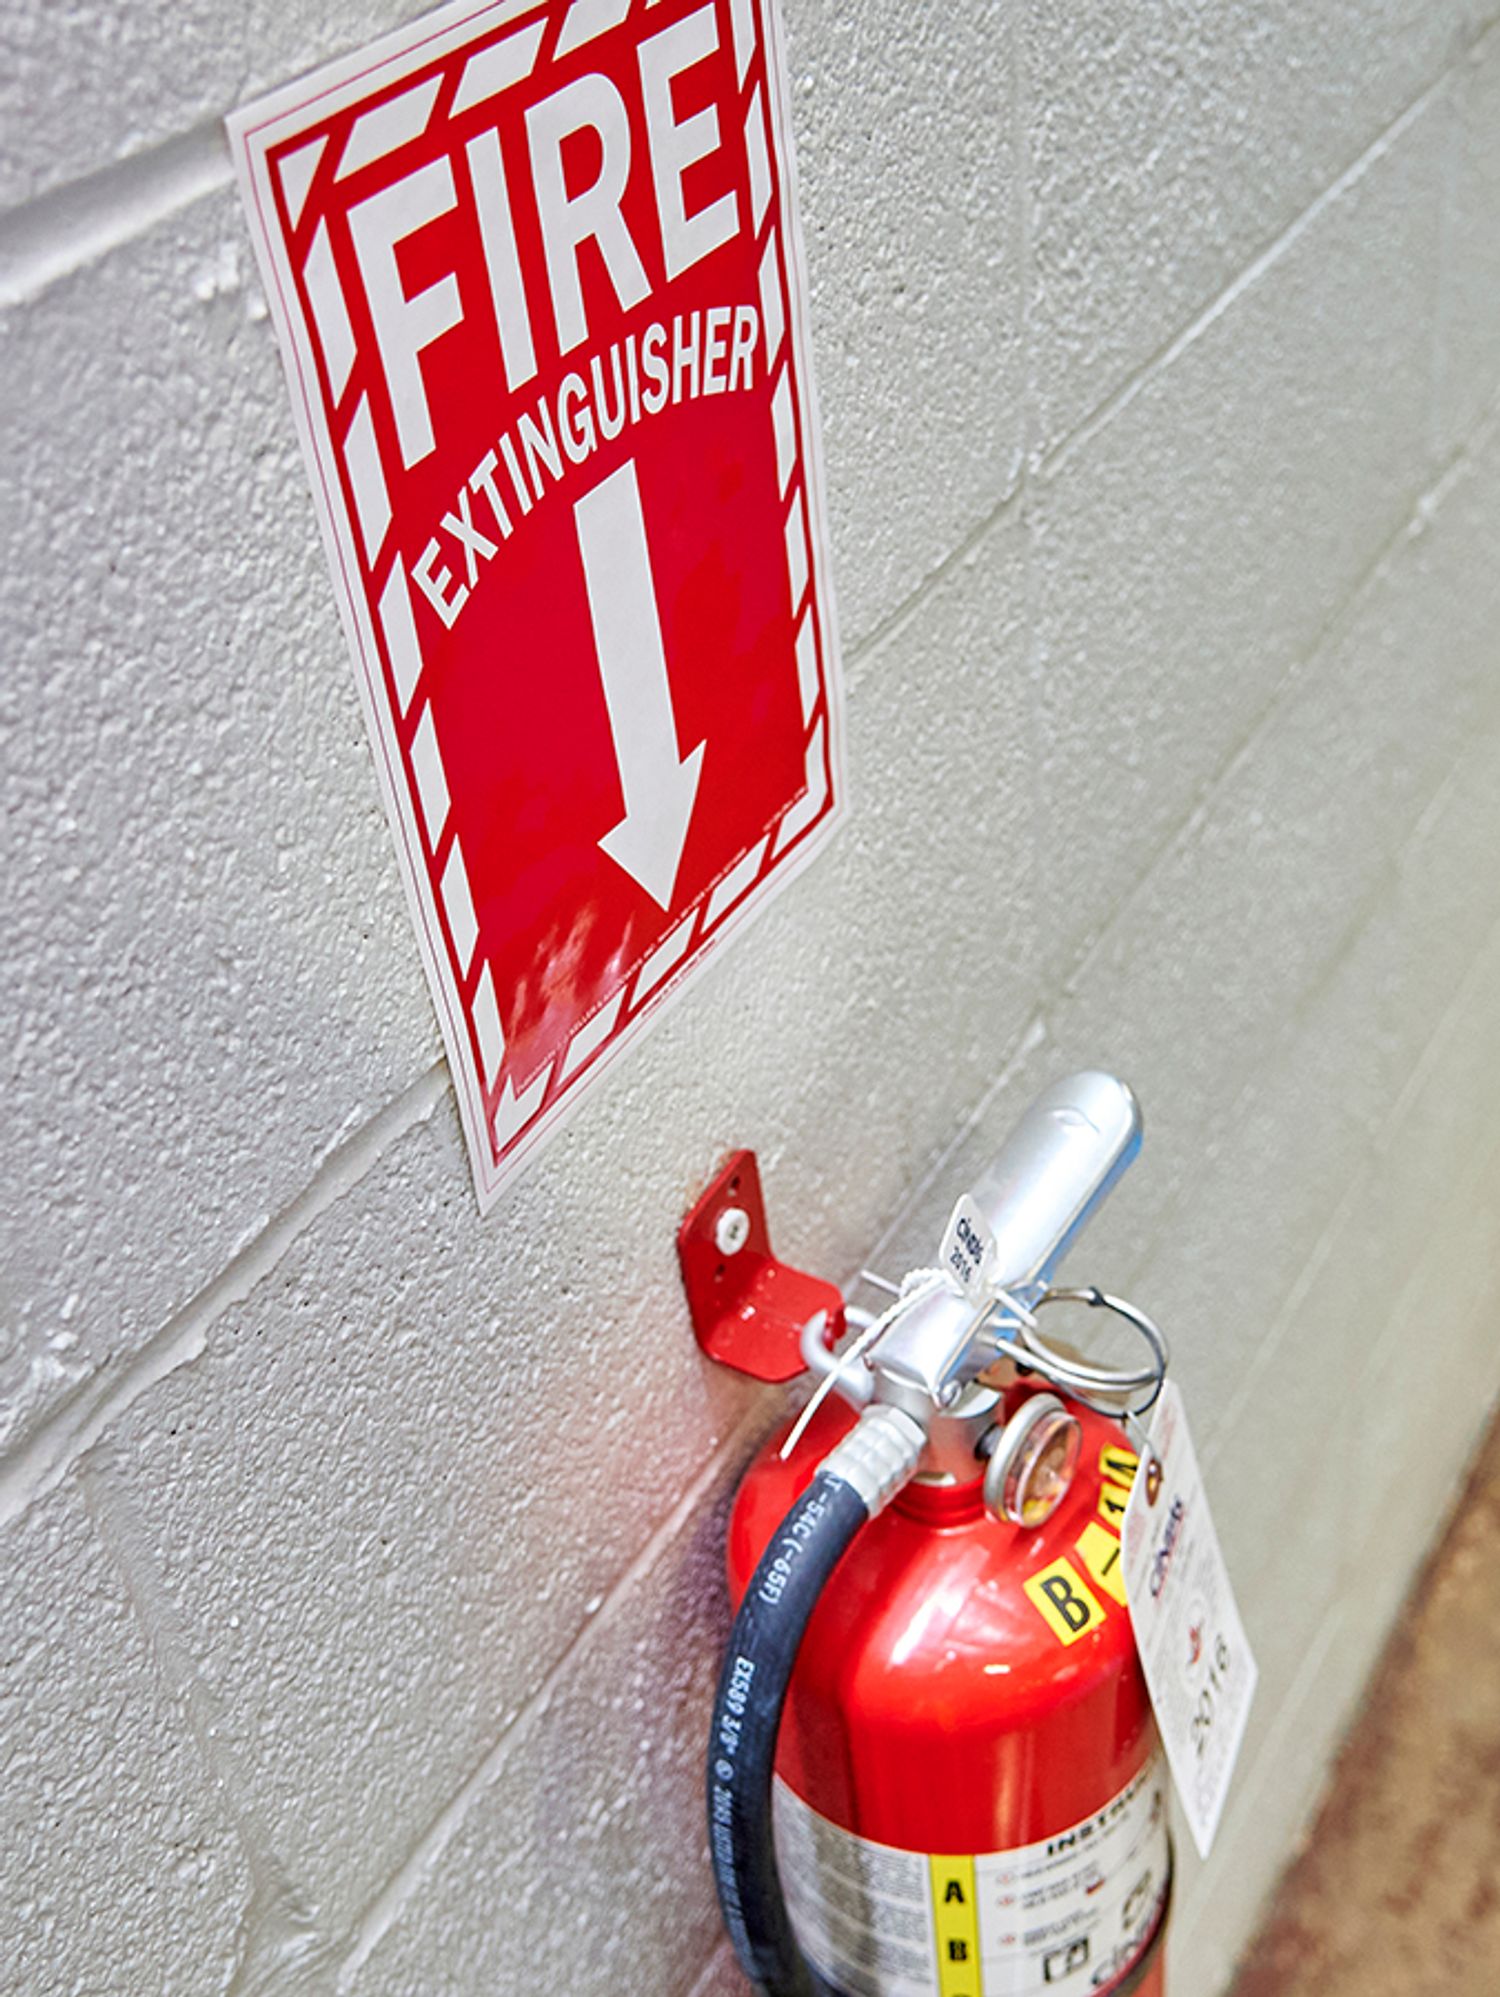 The portable fire extinguisher triad — defining “readibly accessible”